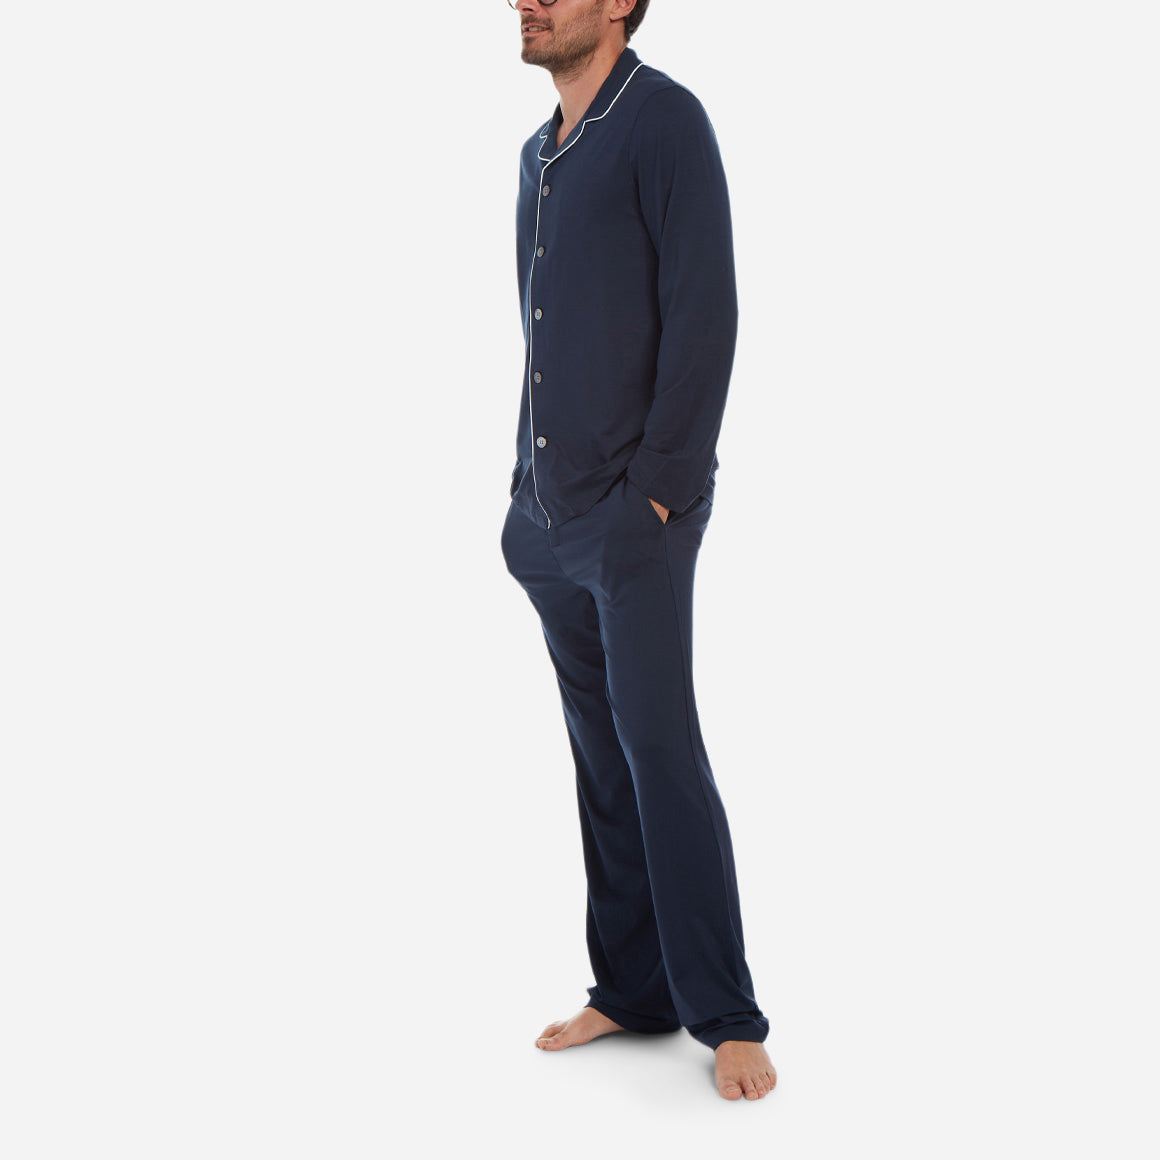 A side-facing model is wearing a long pajama set made of navy micro modal fabric.